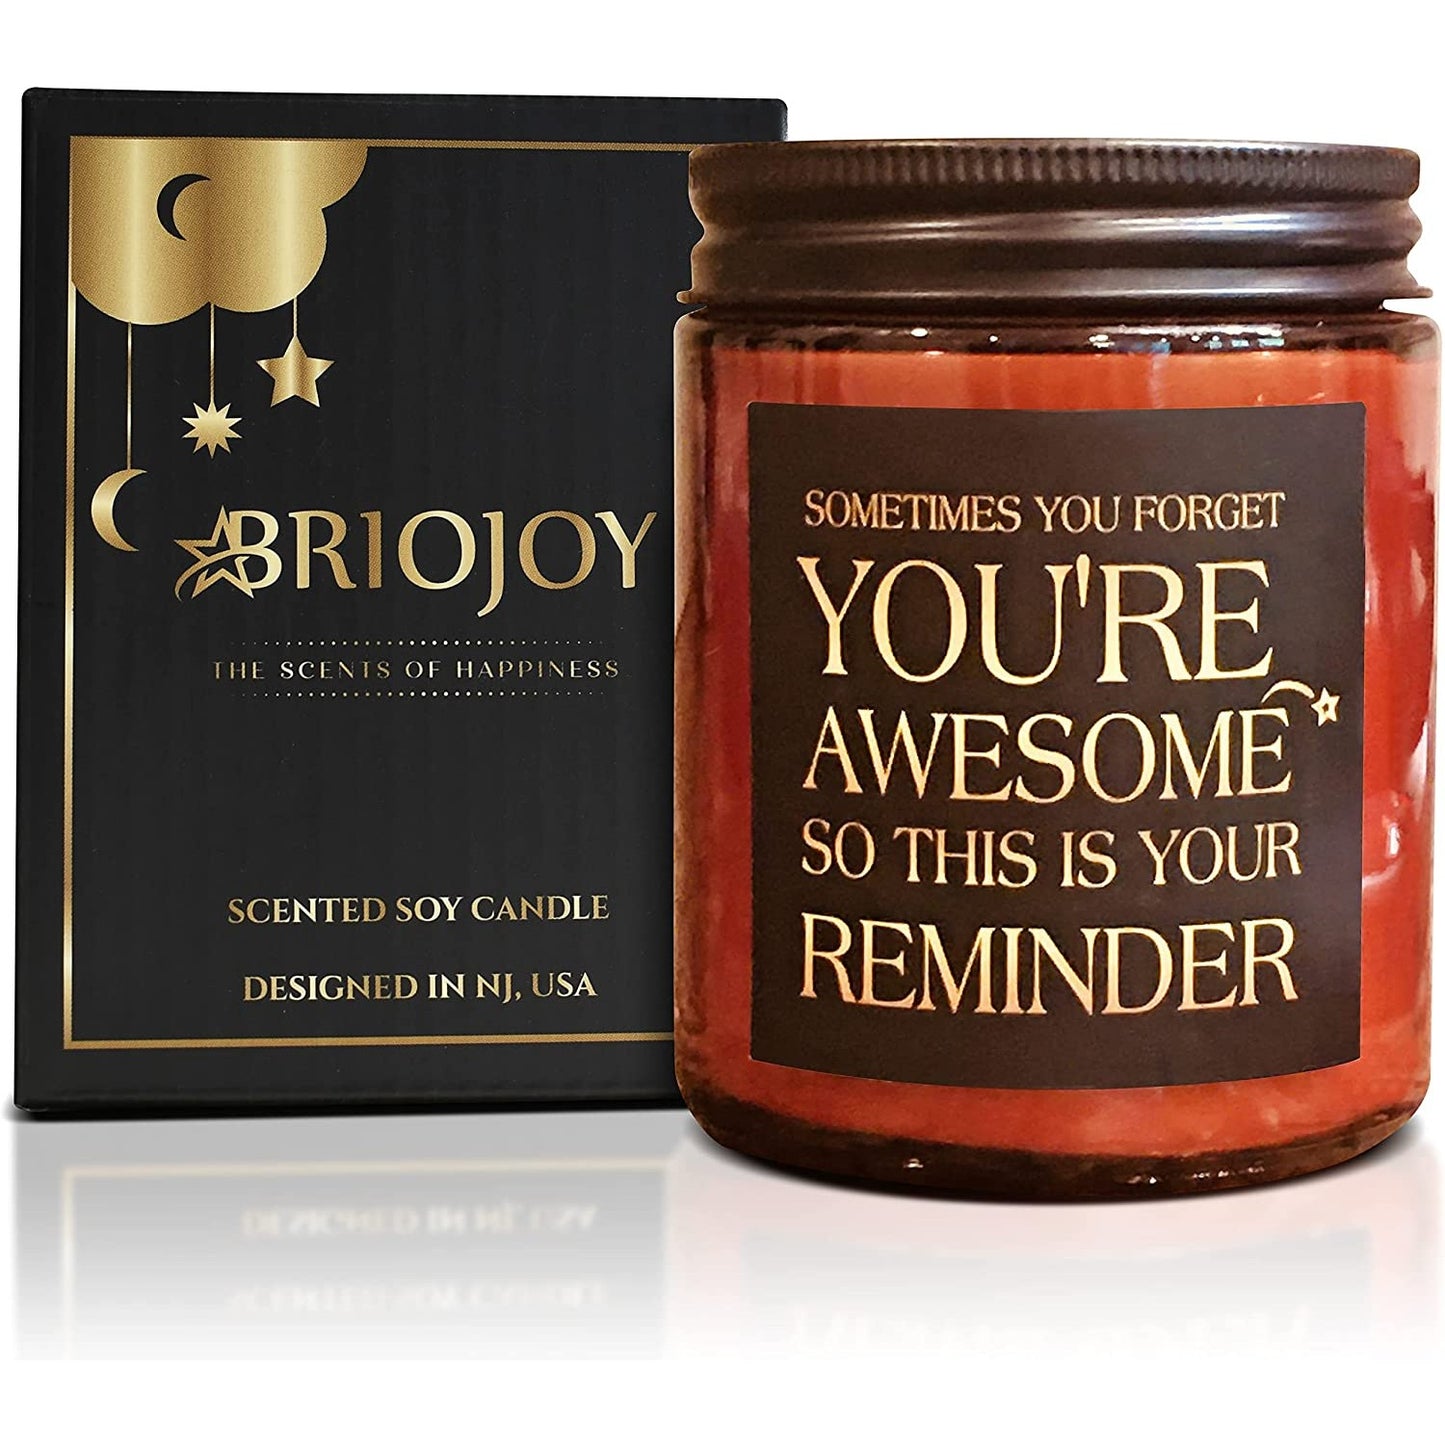 A candle which has a quote printed on it which says, Sometimes You Forget You’re Awesome So This Is Your Reminder.”